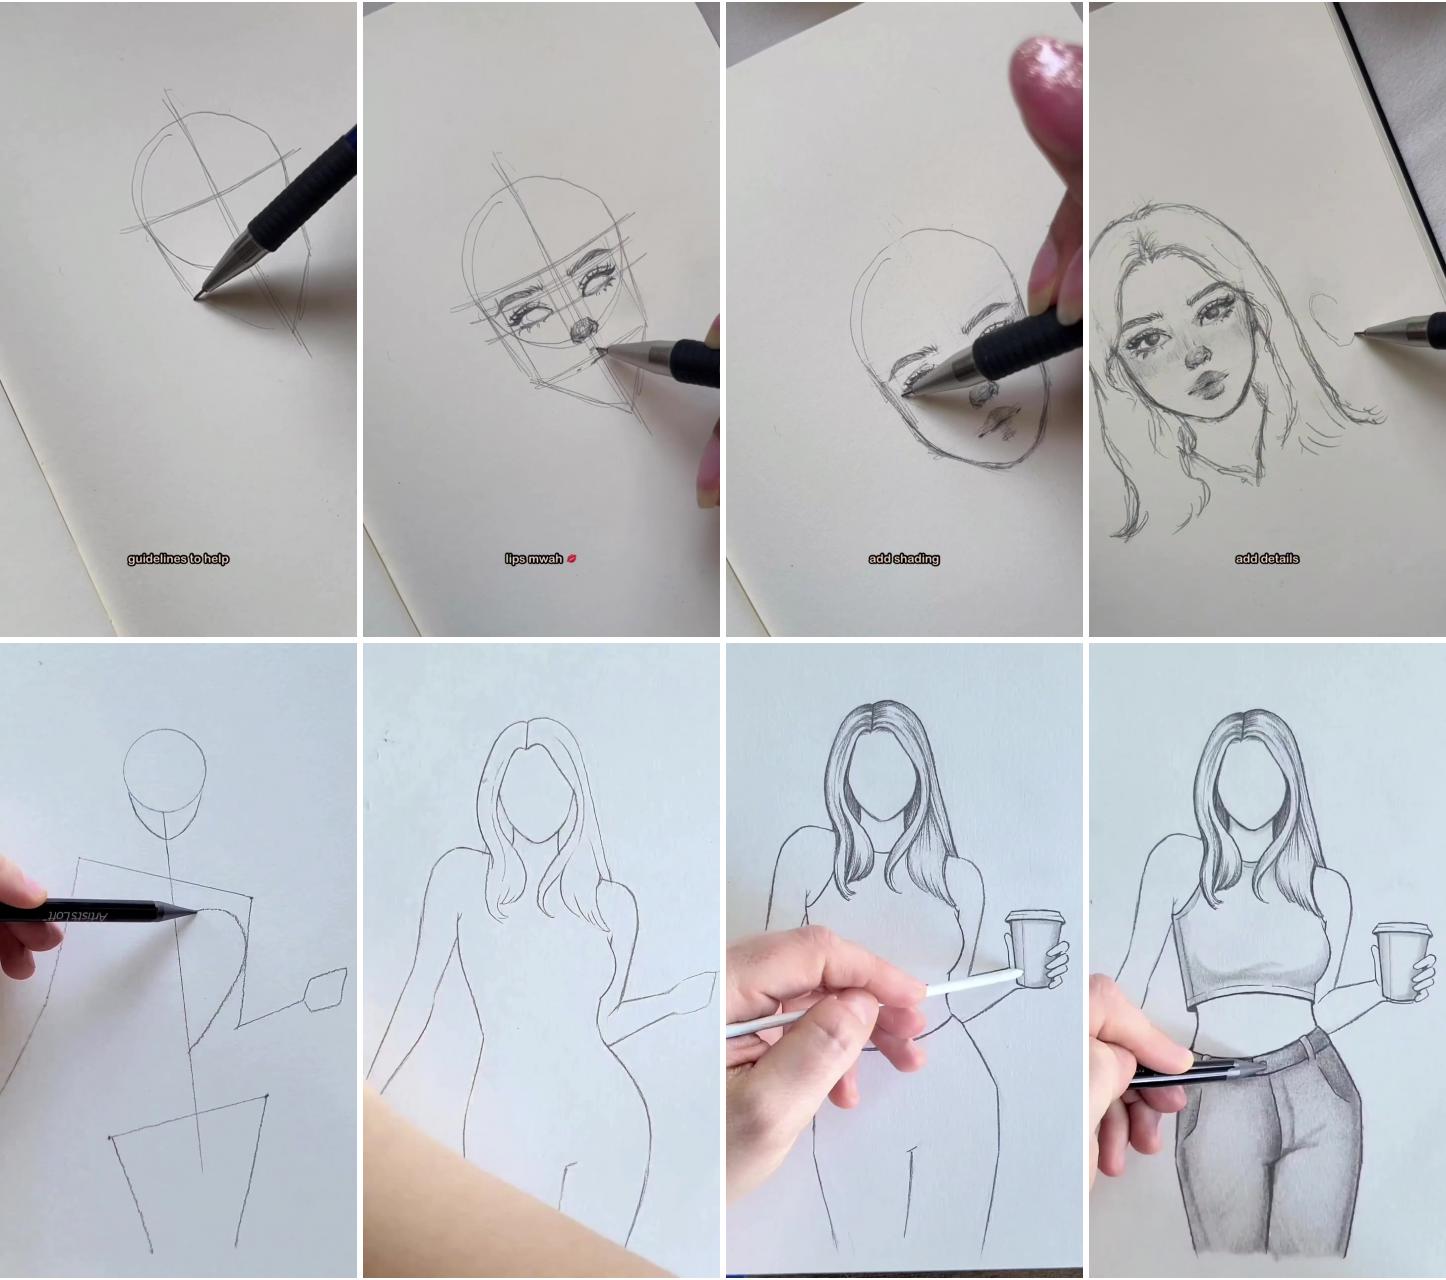 Draw with me, drawing tut | how to draw a cute girl, body drawing tutorial, easy steps art by eyeinspired 